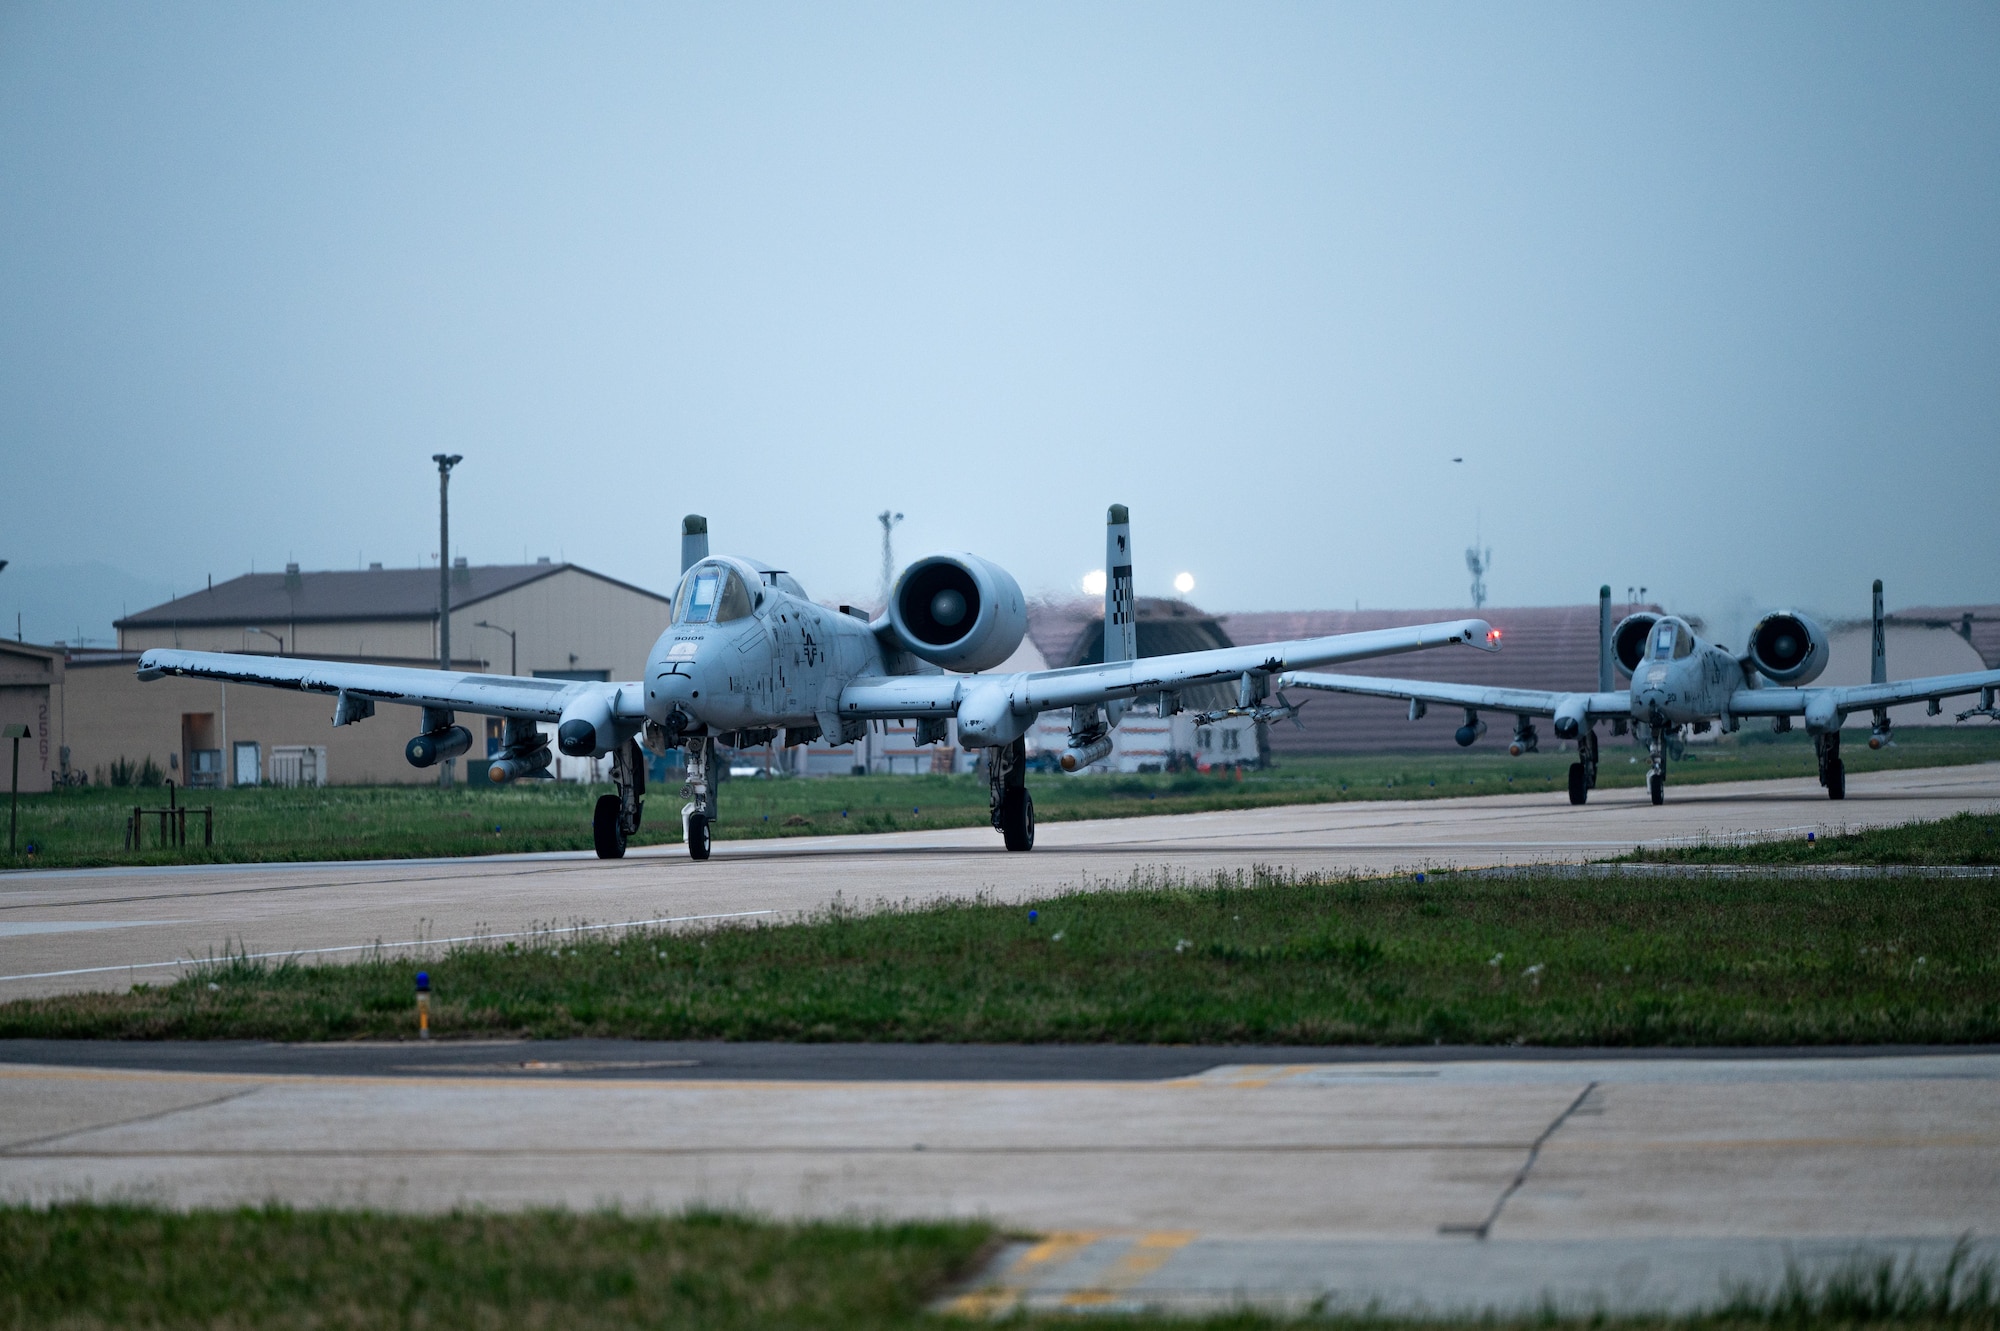 U.S. Air Force A-10C Thunderbolt IIs assigned to the 25th Fighter Squadron, taxi during the Korea Flying Training 2024 event at Kunsan Air Base, Republic of Korea, April 26, 2024. KFT 24 focused on the tactical execution of combat missions to maintain military readiness and reinforced the 51st Fighter Wing’s capabilities to operate from locations with varying levels of resources and support. (U.S. Air Force photo by Staff Sgt. Jovan Banks)